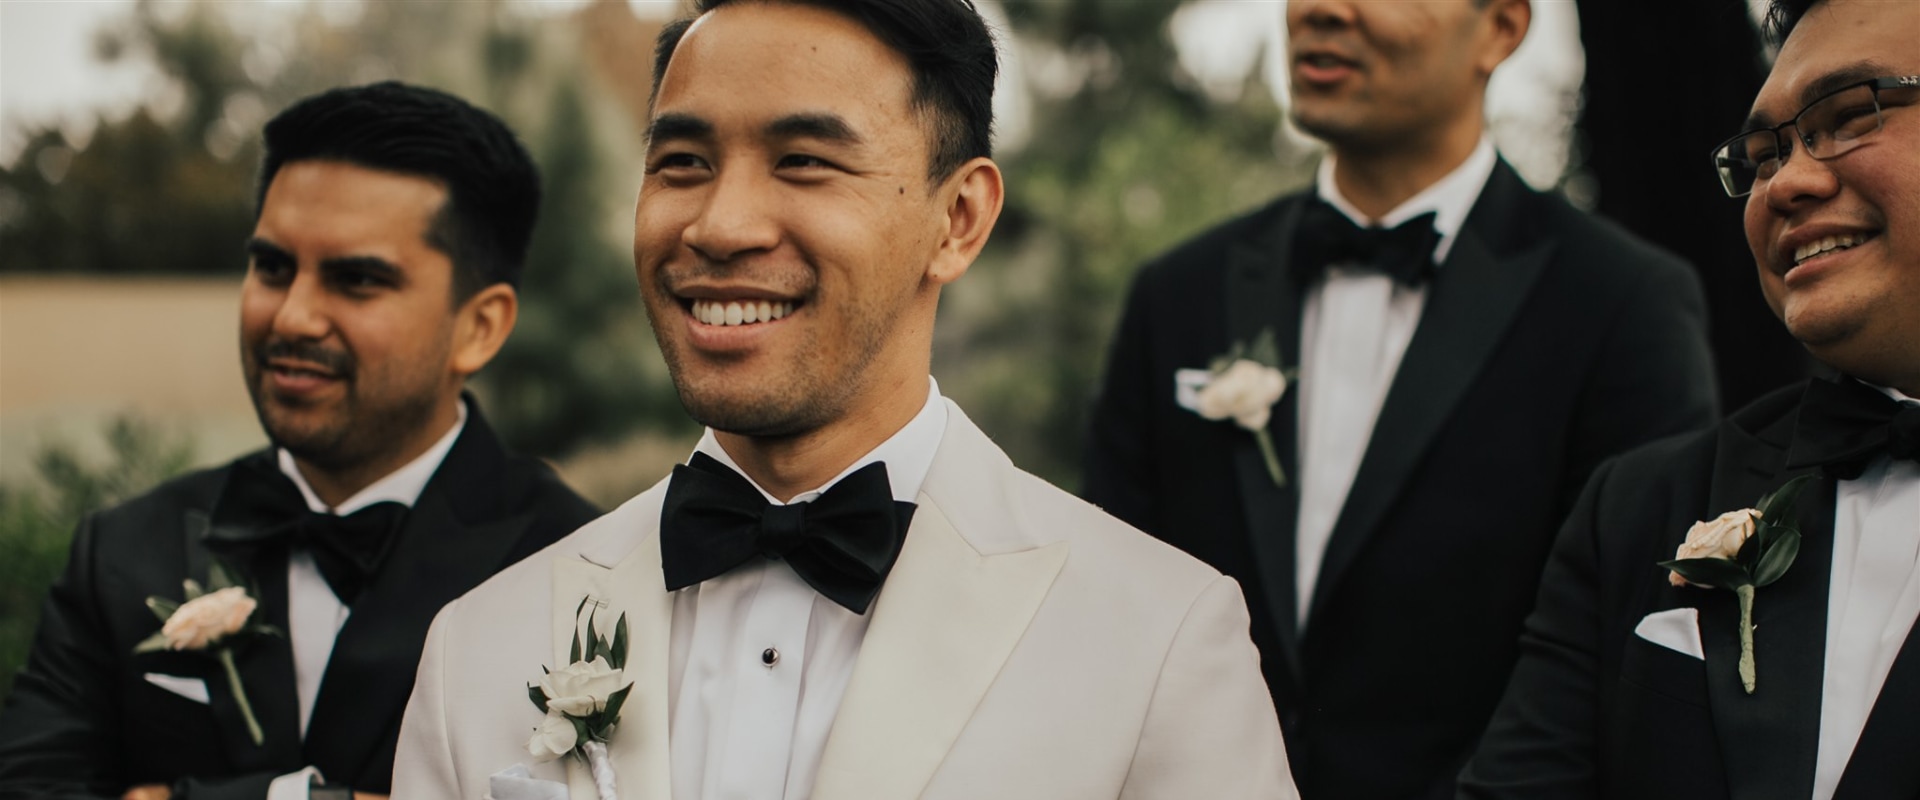 Black Tie Attire for Grooms: A Complete Guide